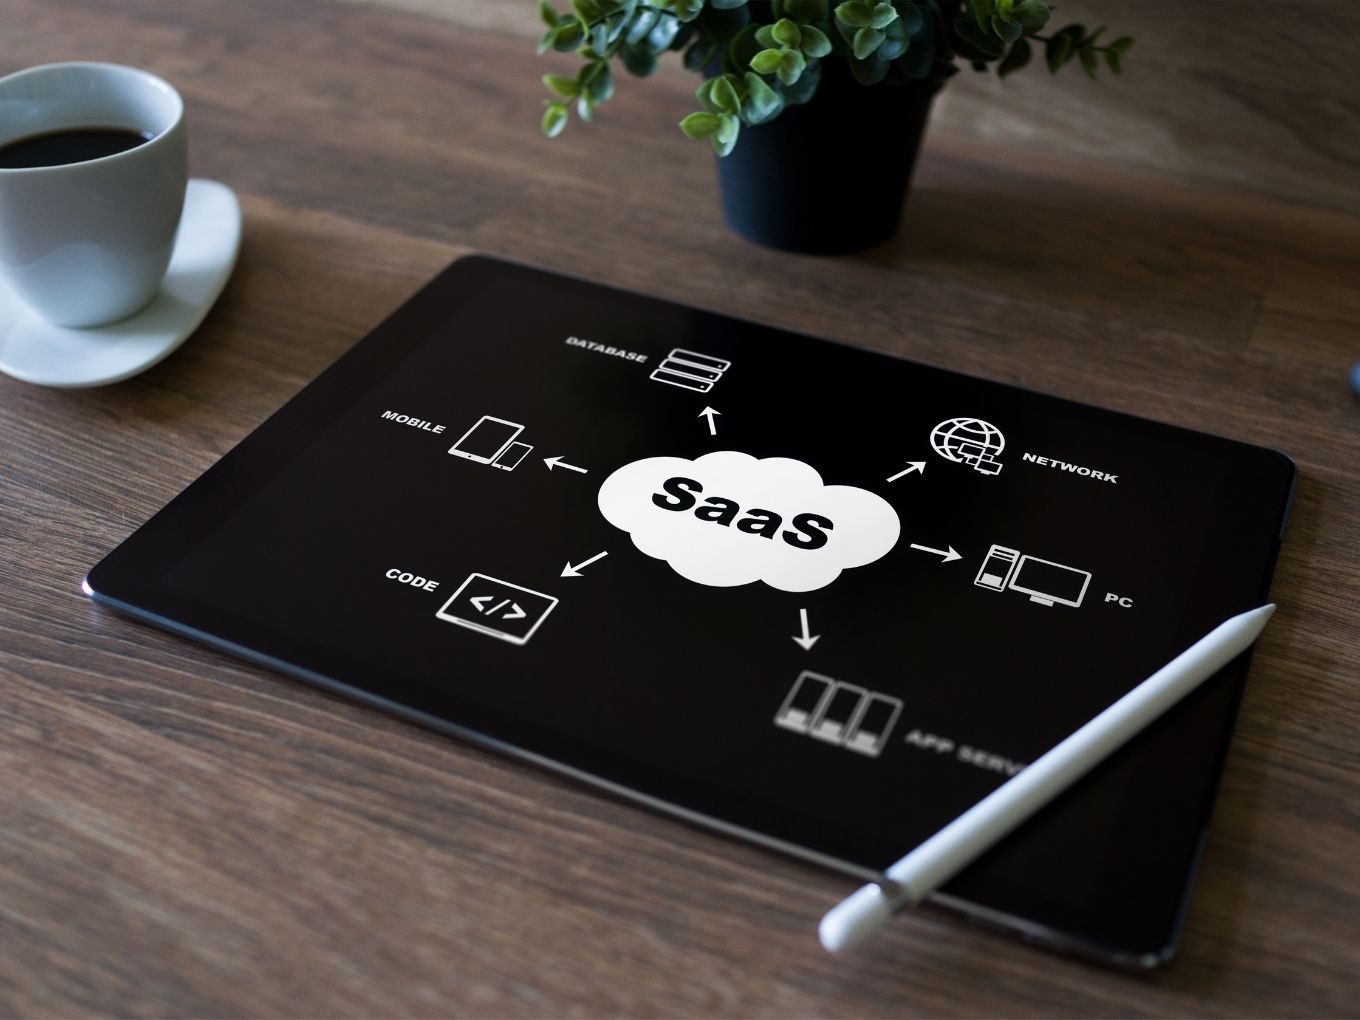 Getting On SaaS: Why It Makes Sense For Your Business